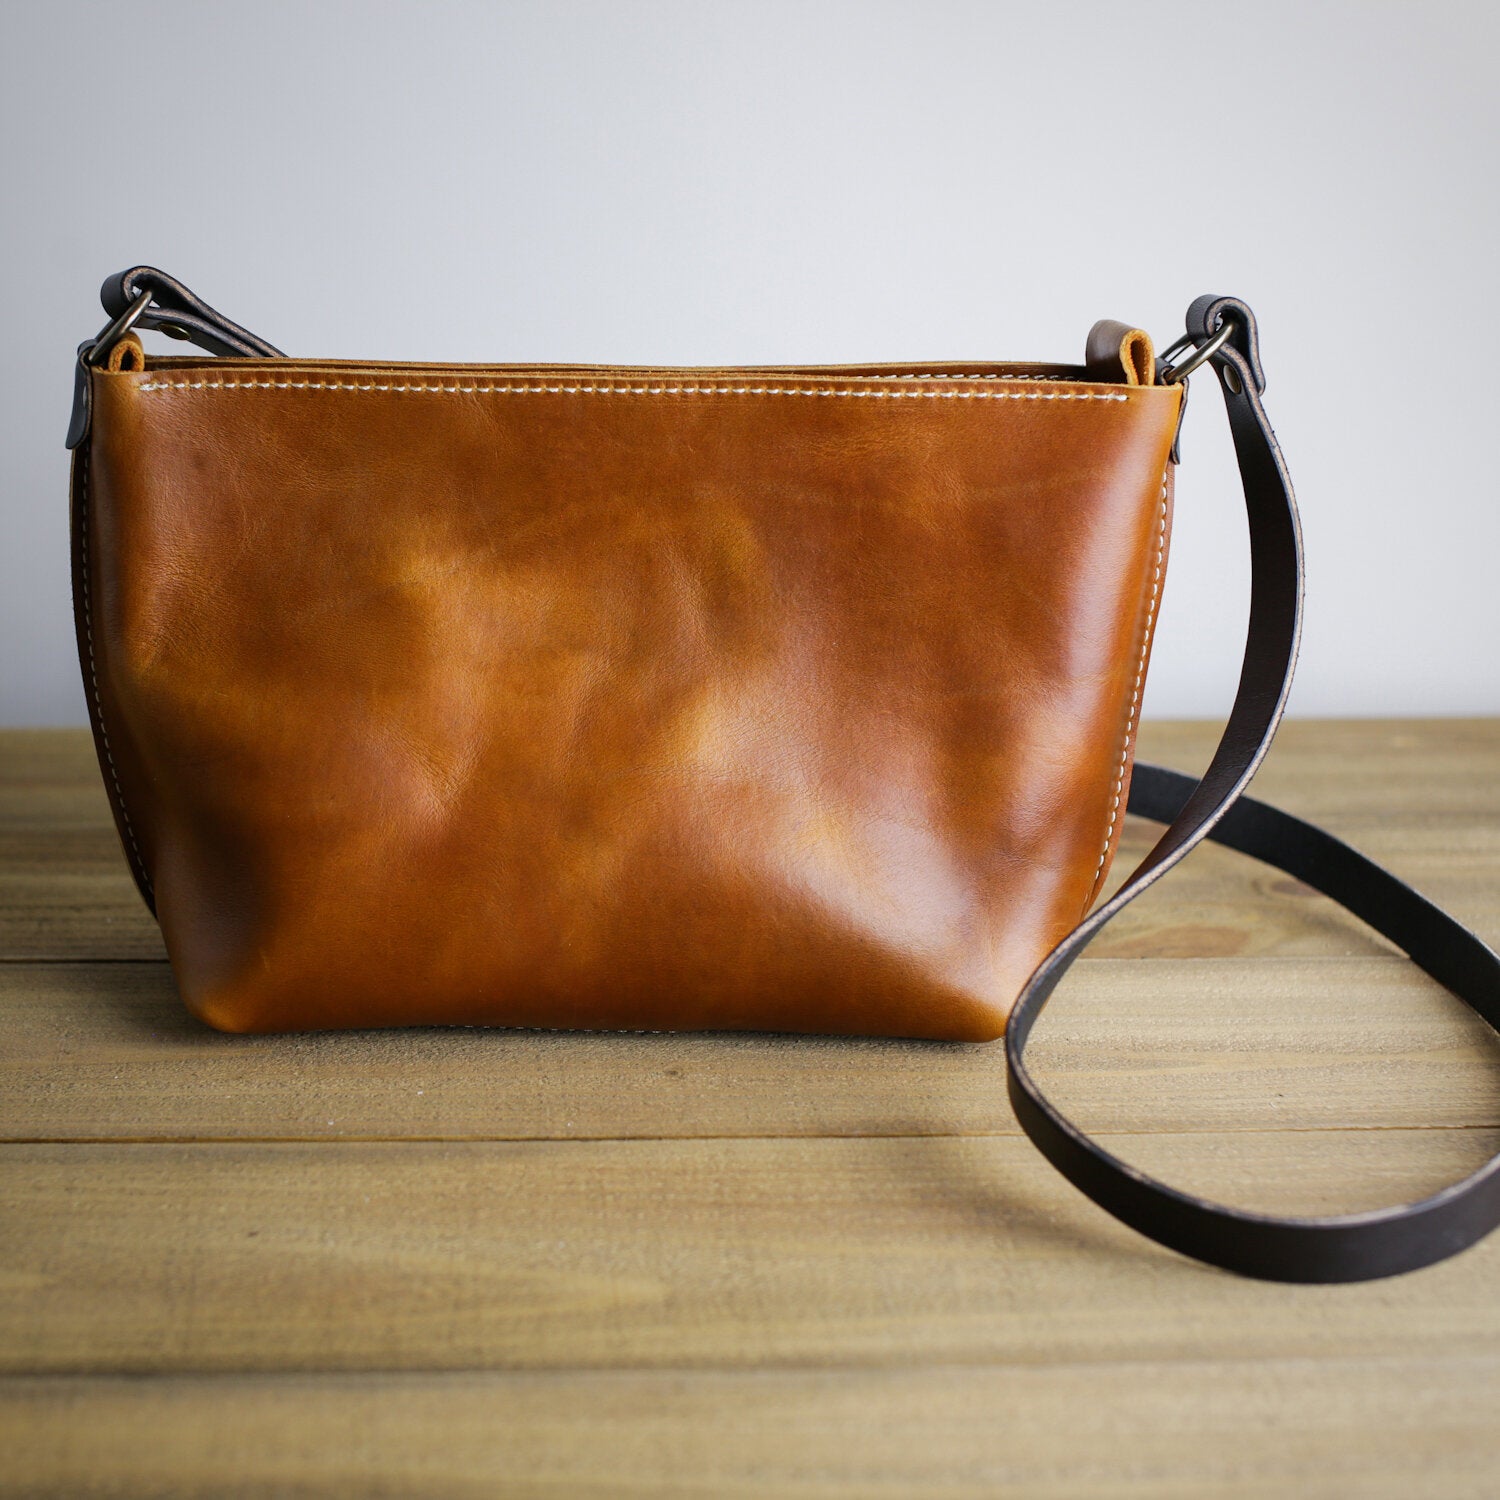 What Type of Leather is Best for Handbags? – Frederic St James